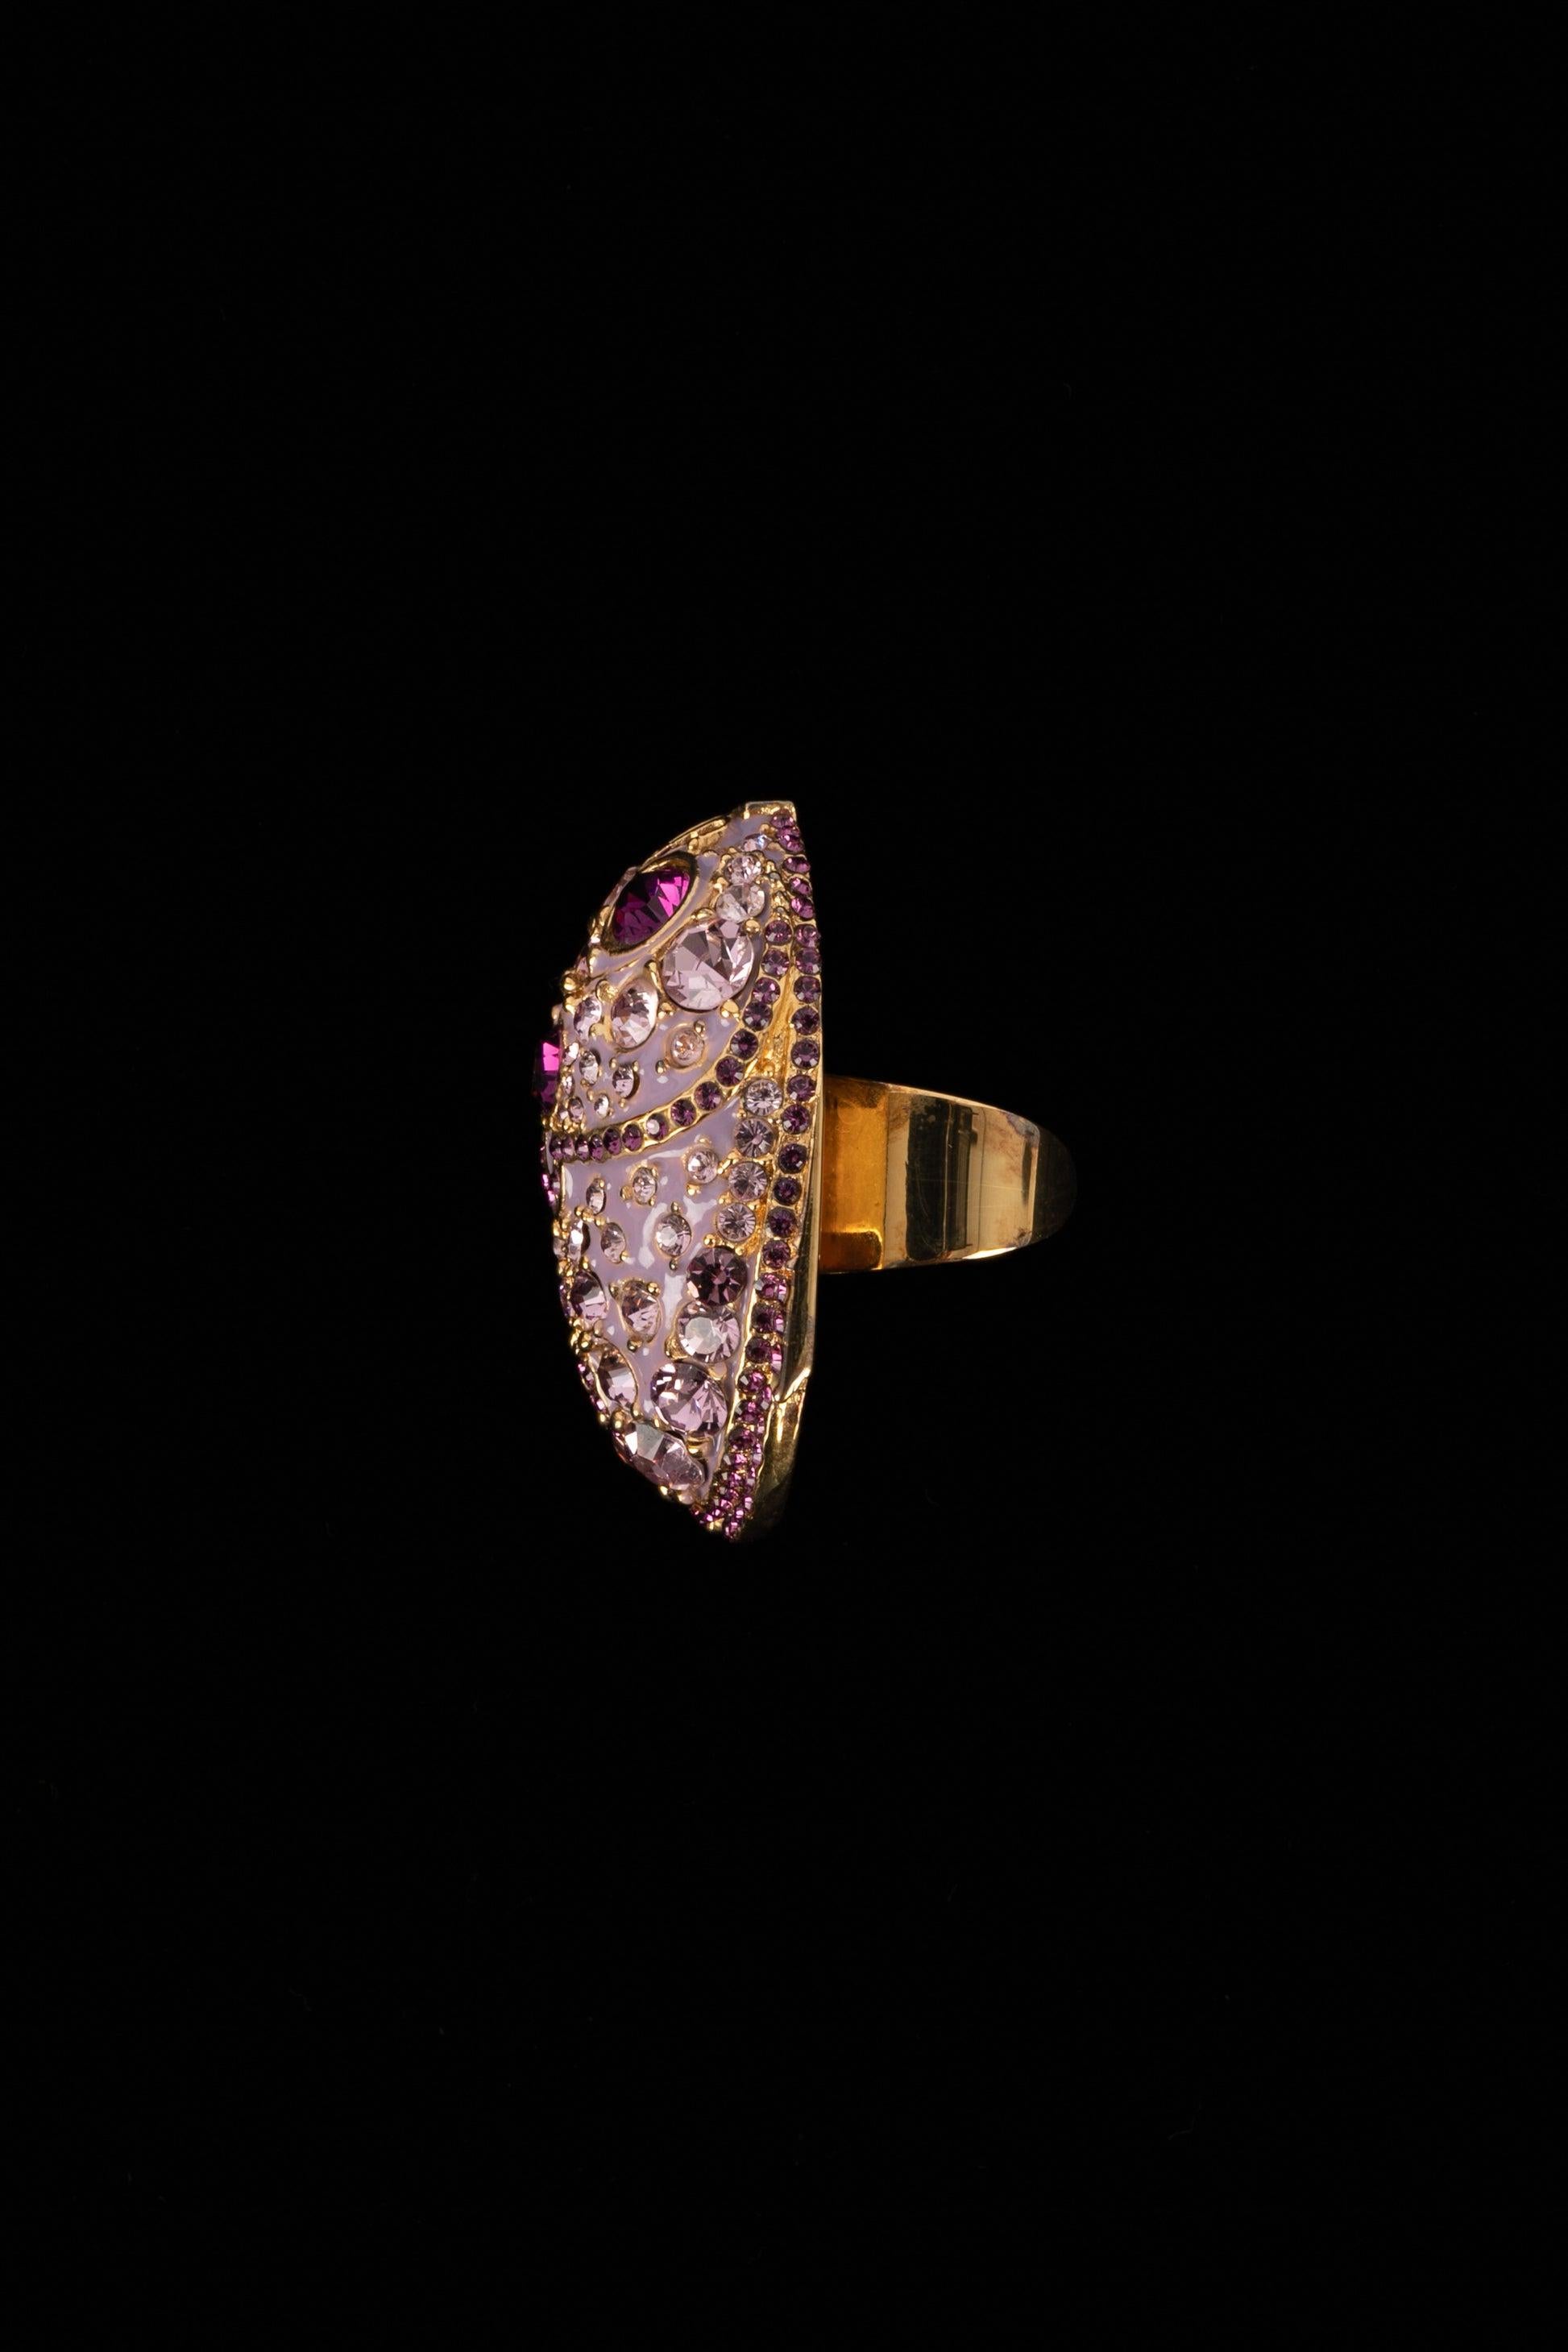 Women's Christian Dior Ring Haute Couture with Purple Enamel and Rhinestones, 2004 For Sale